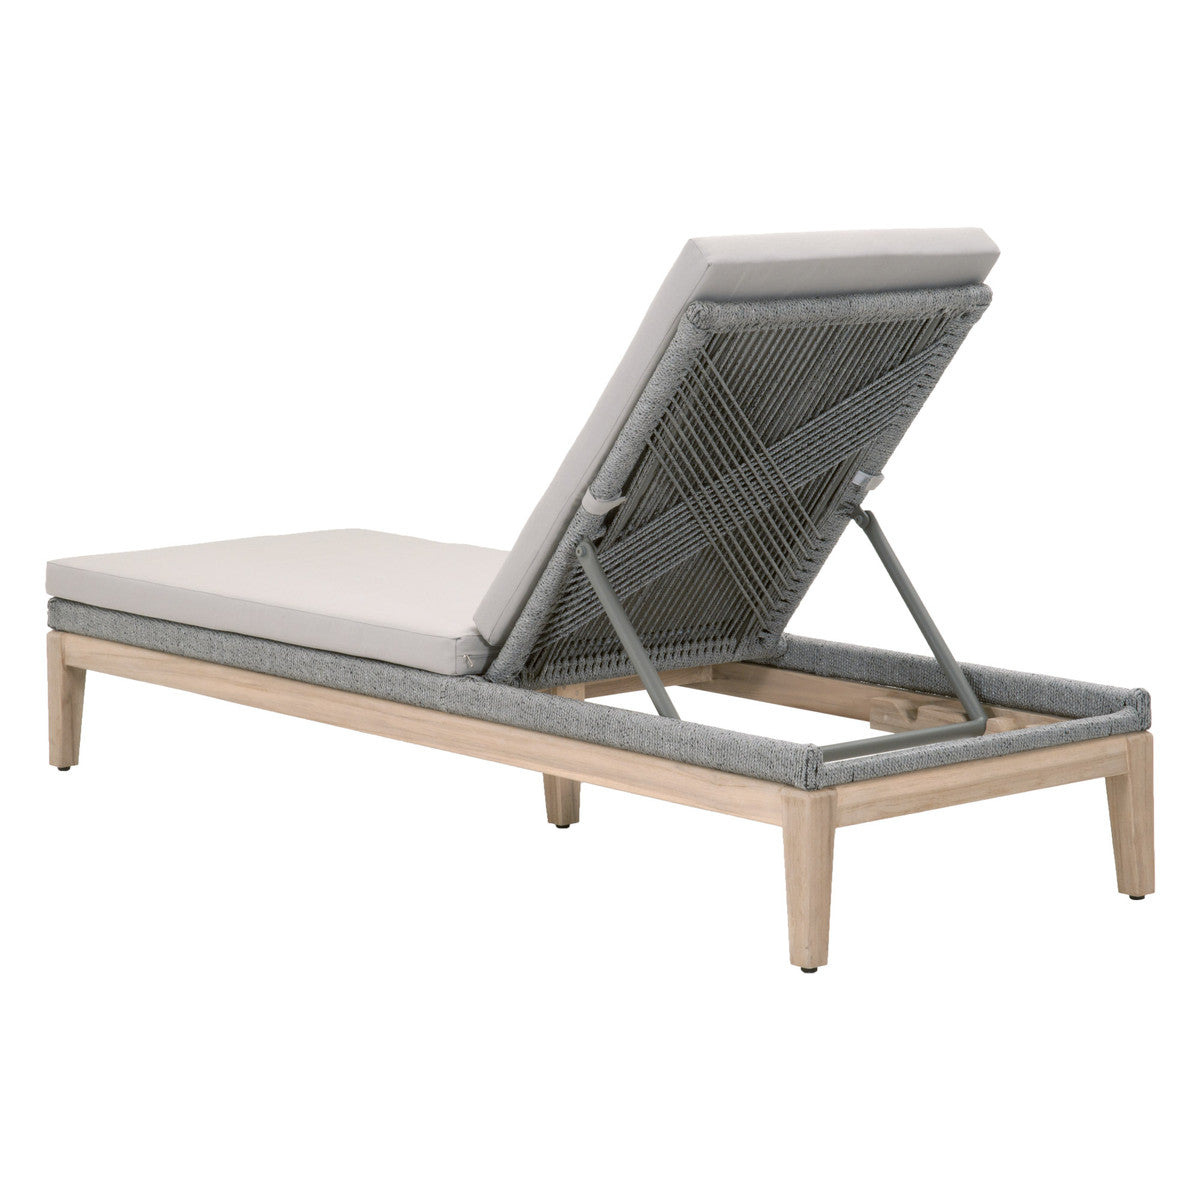 X Rope Outdoor Chaise